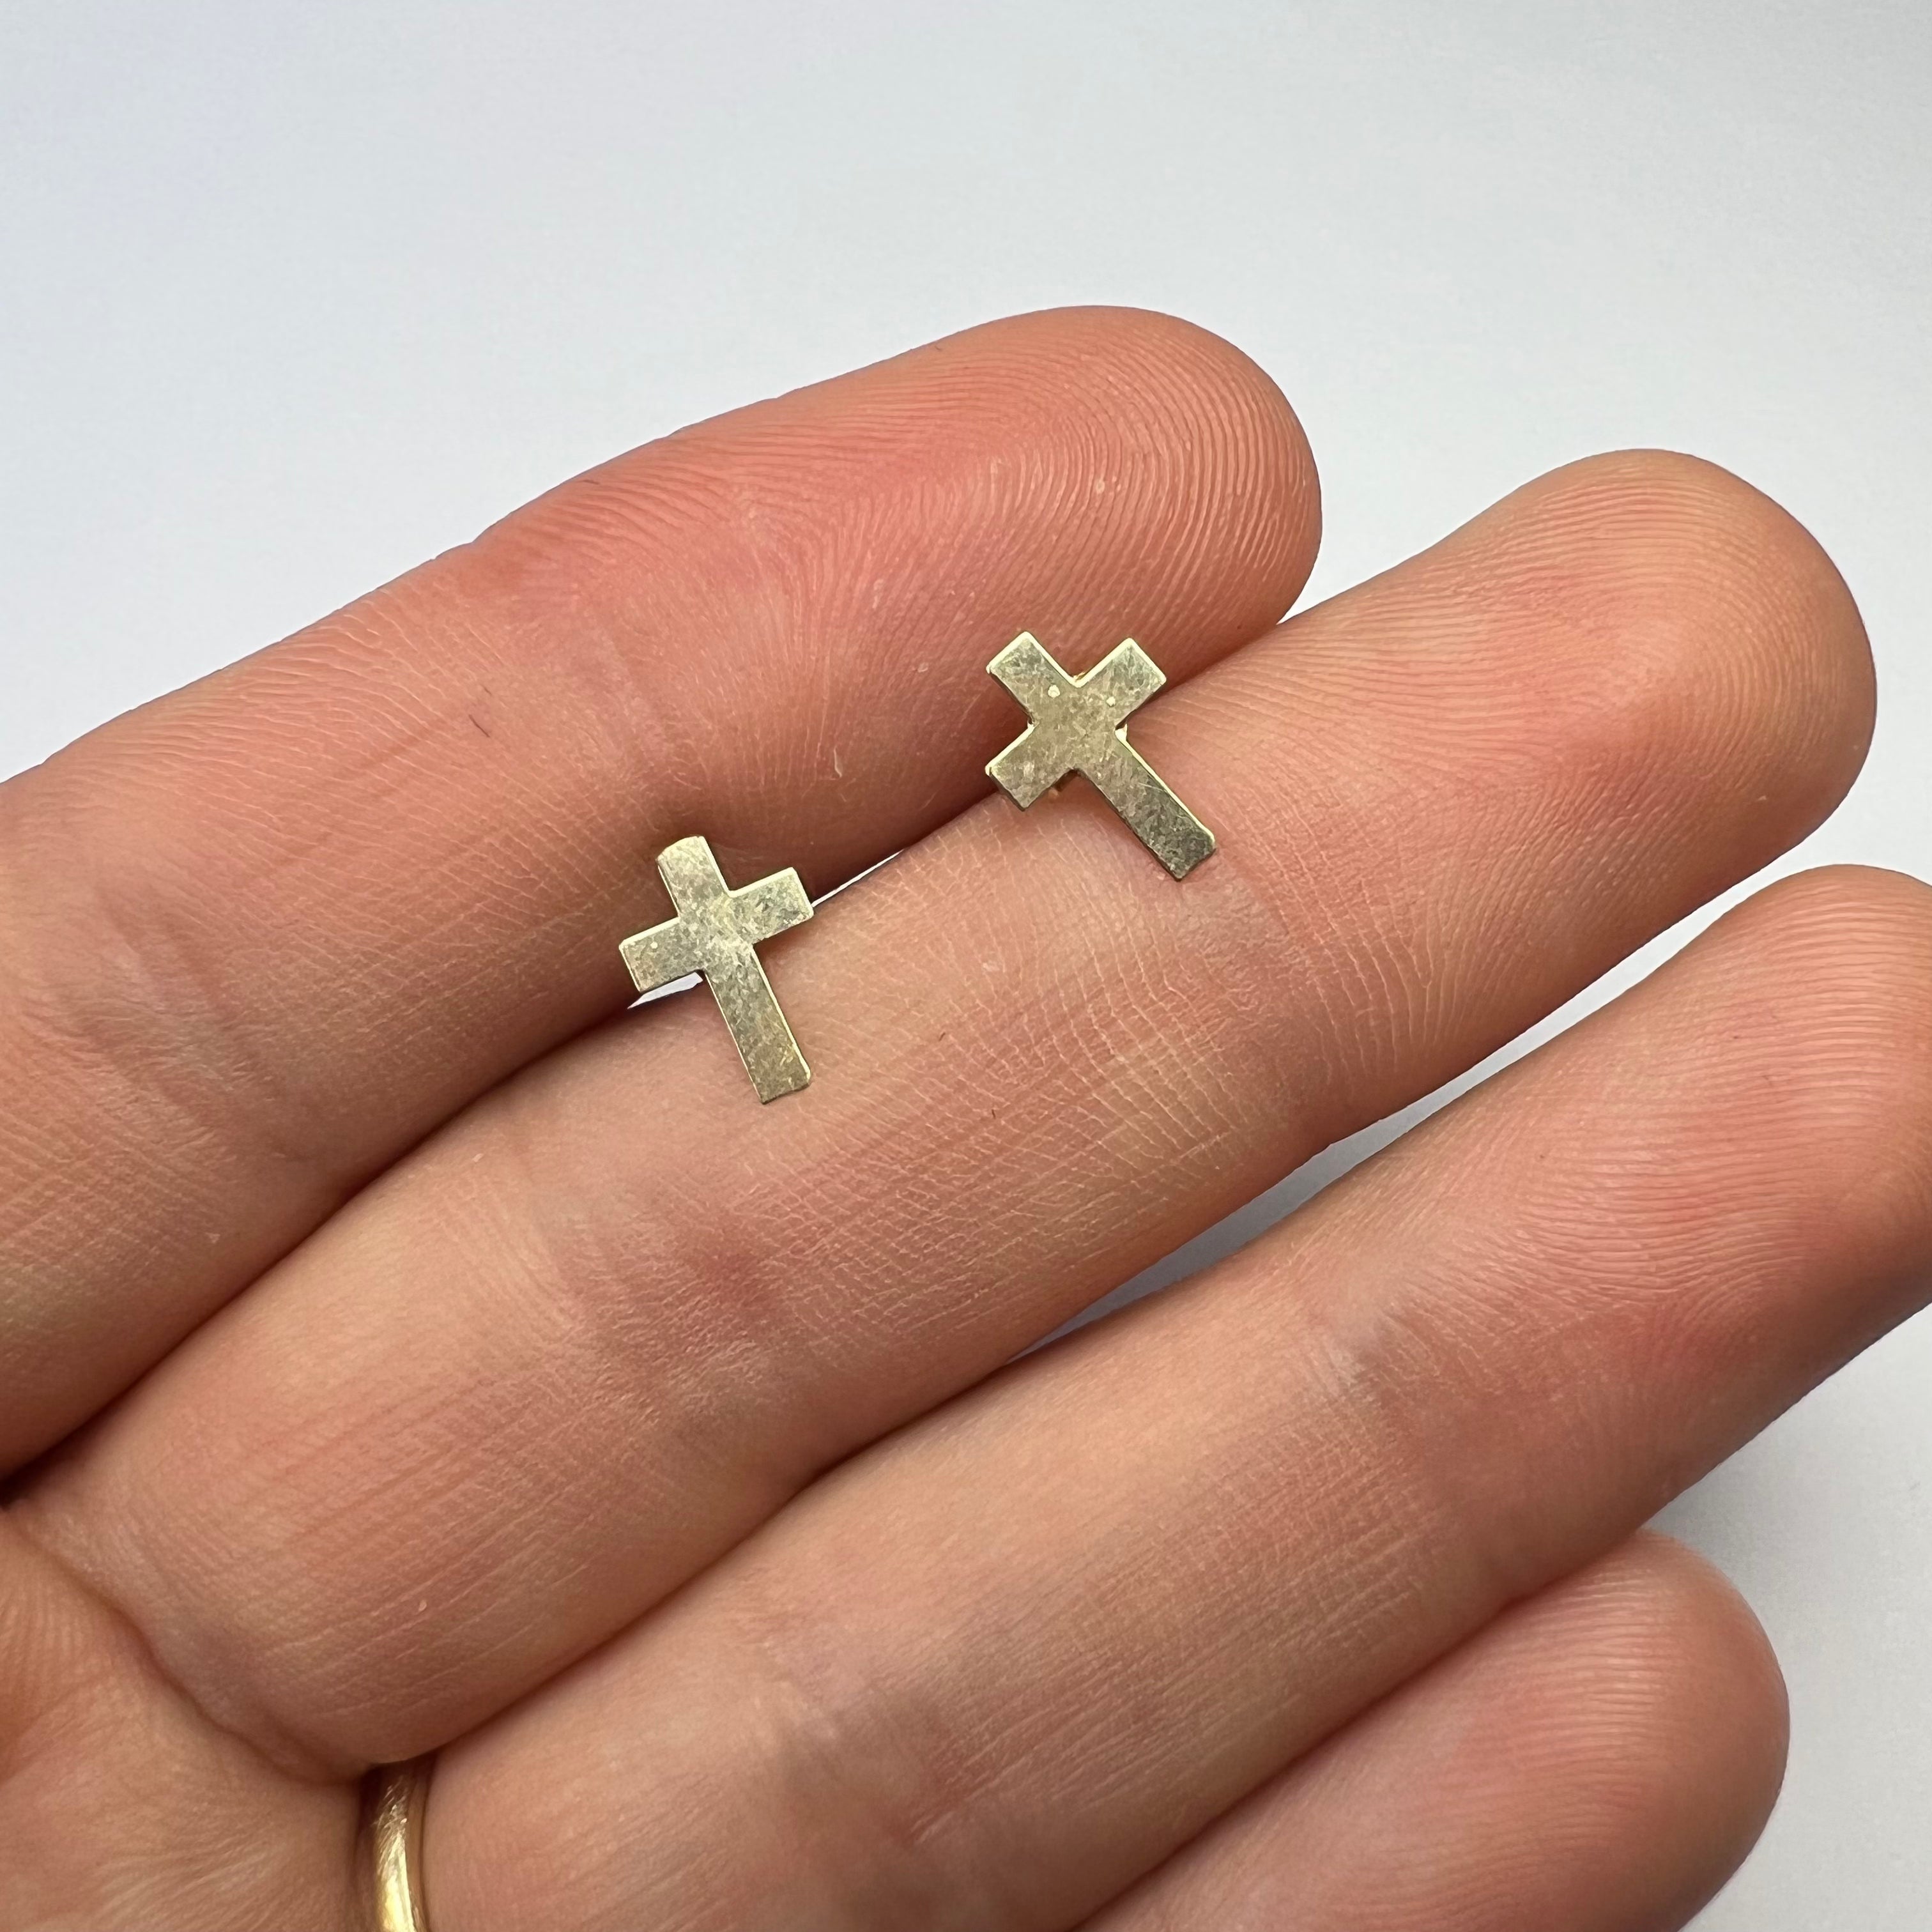 Solid 14k Yellow Gold Simple Flat Cross Push Back Earring Studs 9X6mm